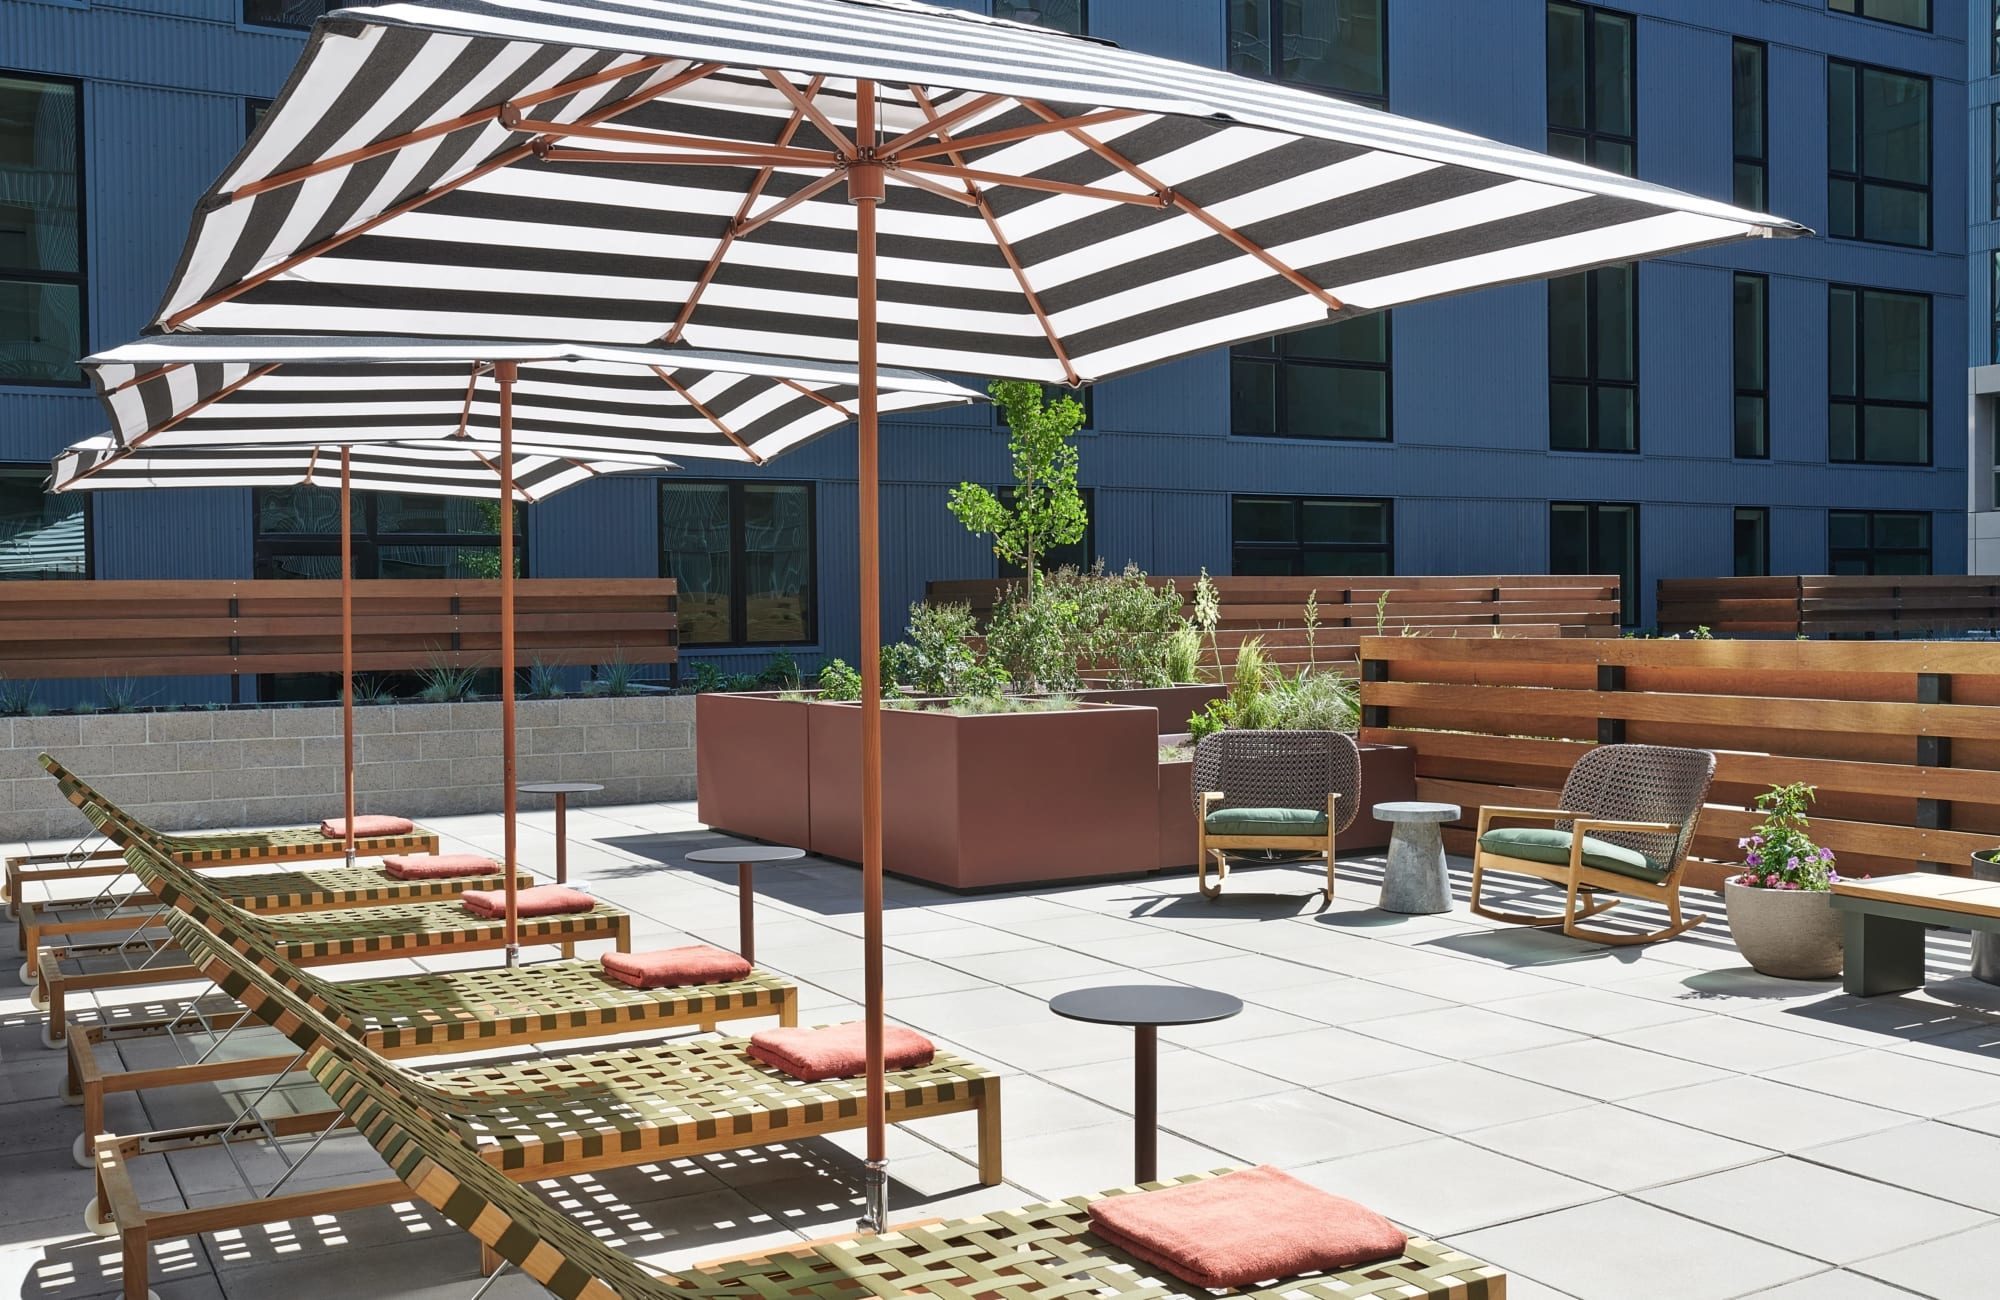 Lounge, patio seating with shade umbrellas